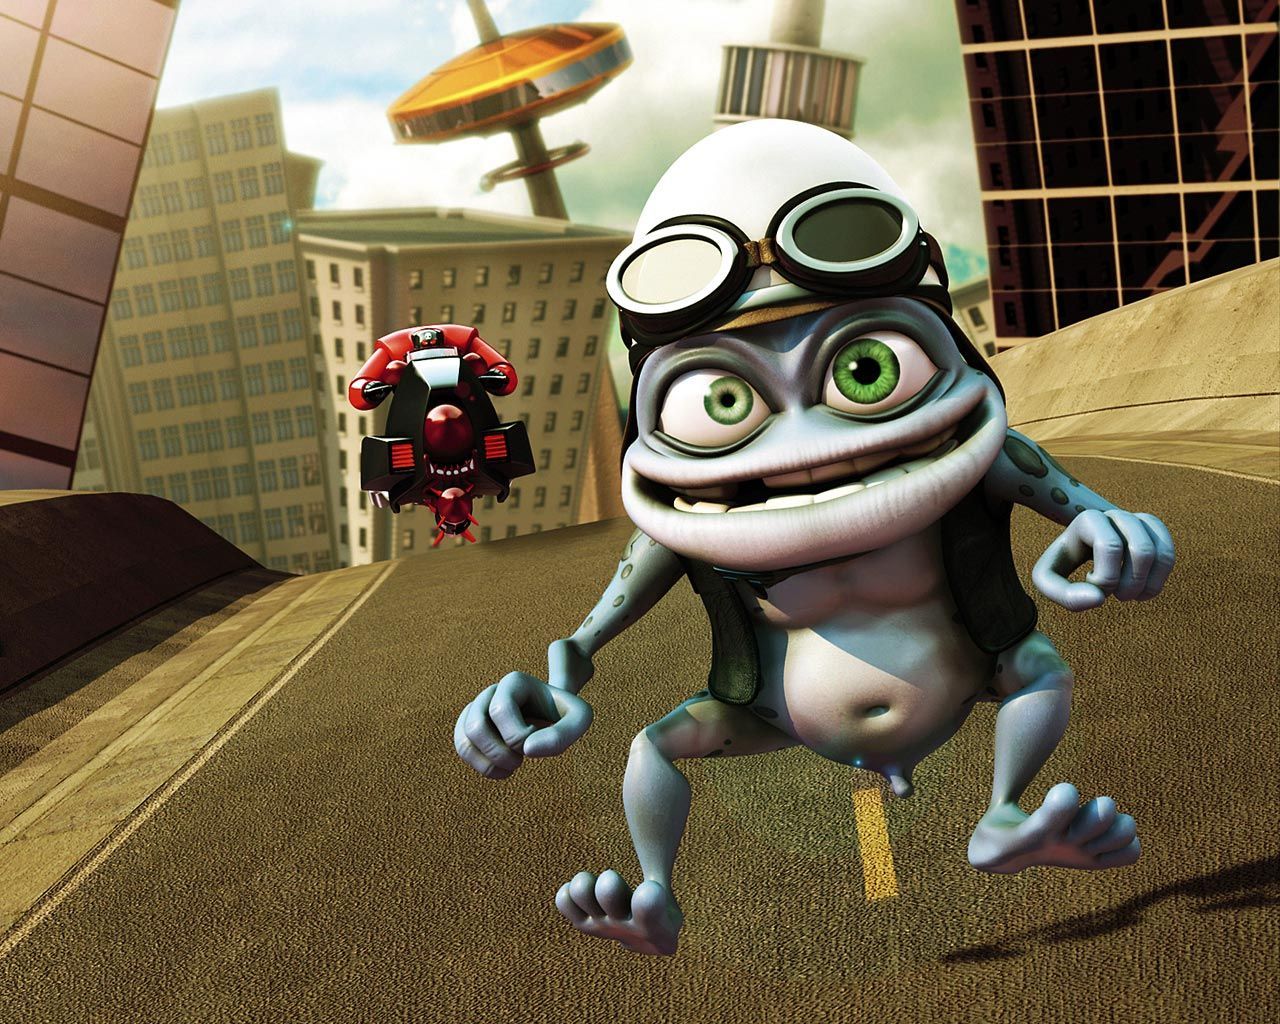 1 Crazy Frog HD Wallpapers | Backgrounds - Wallpaper Abyss